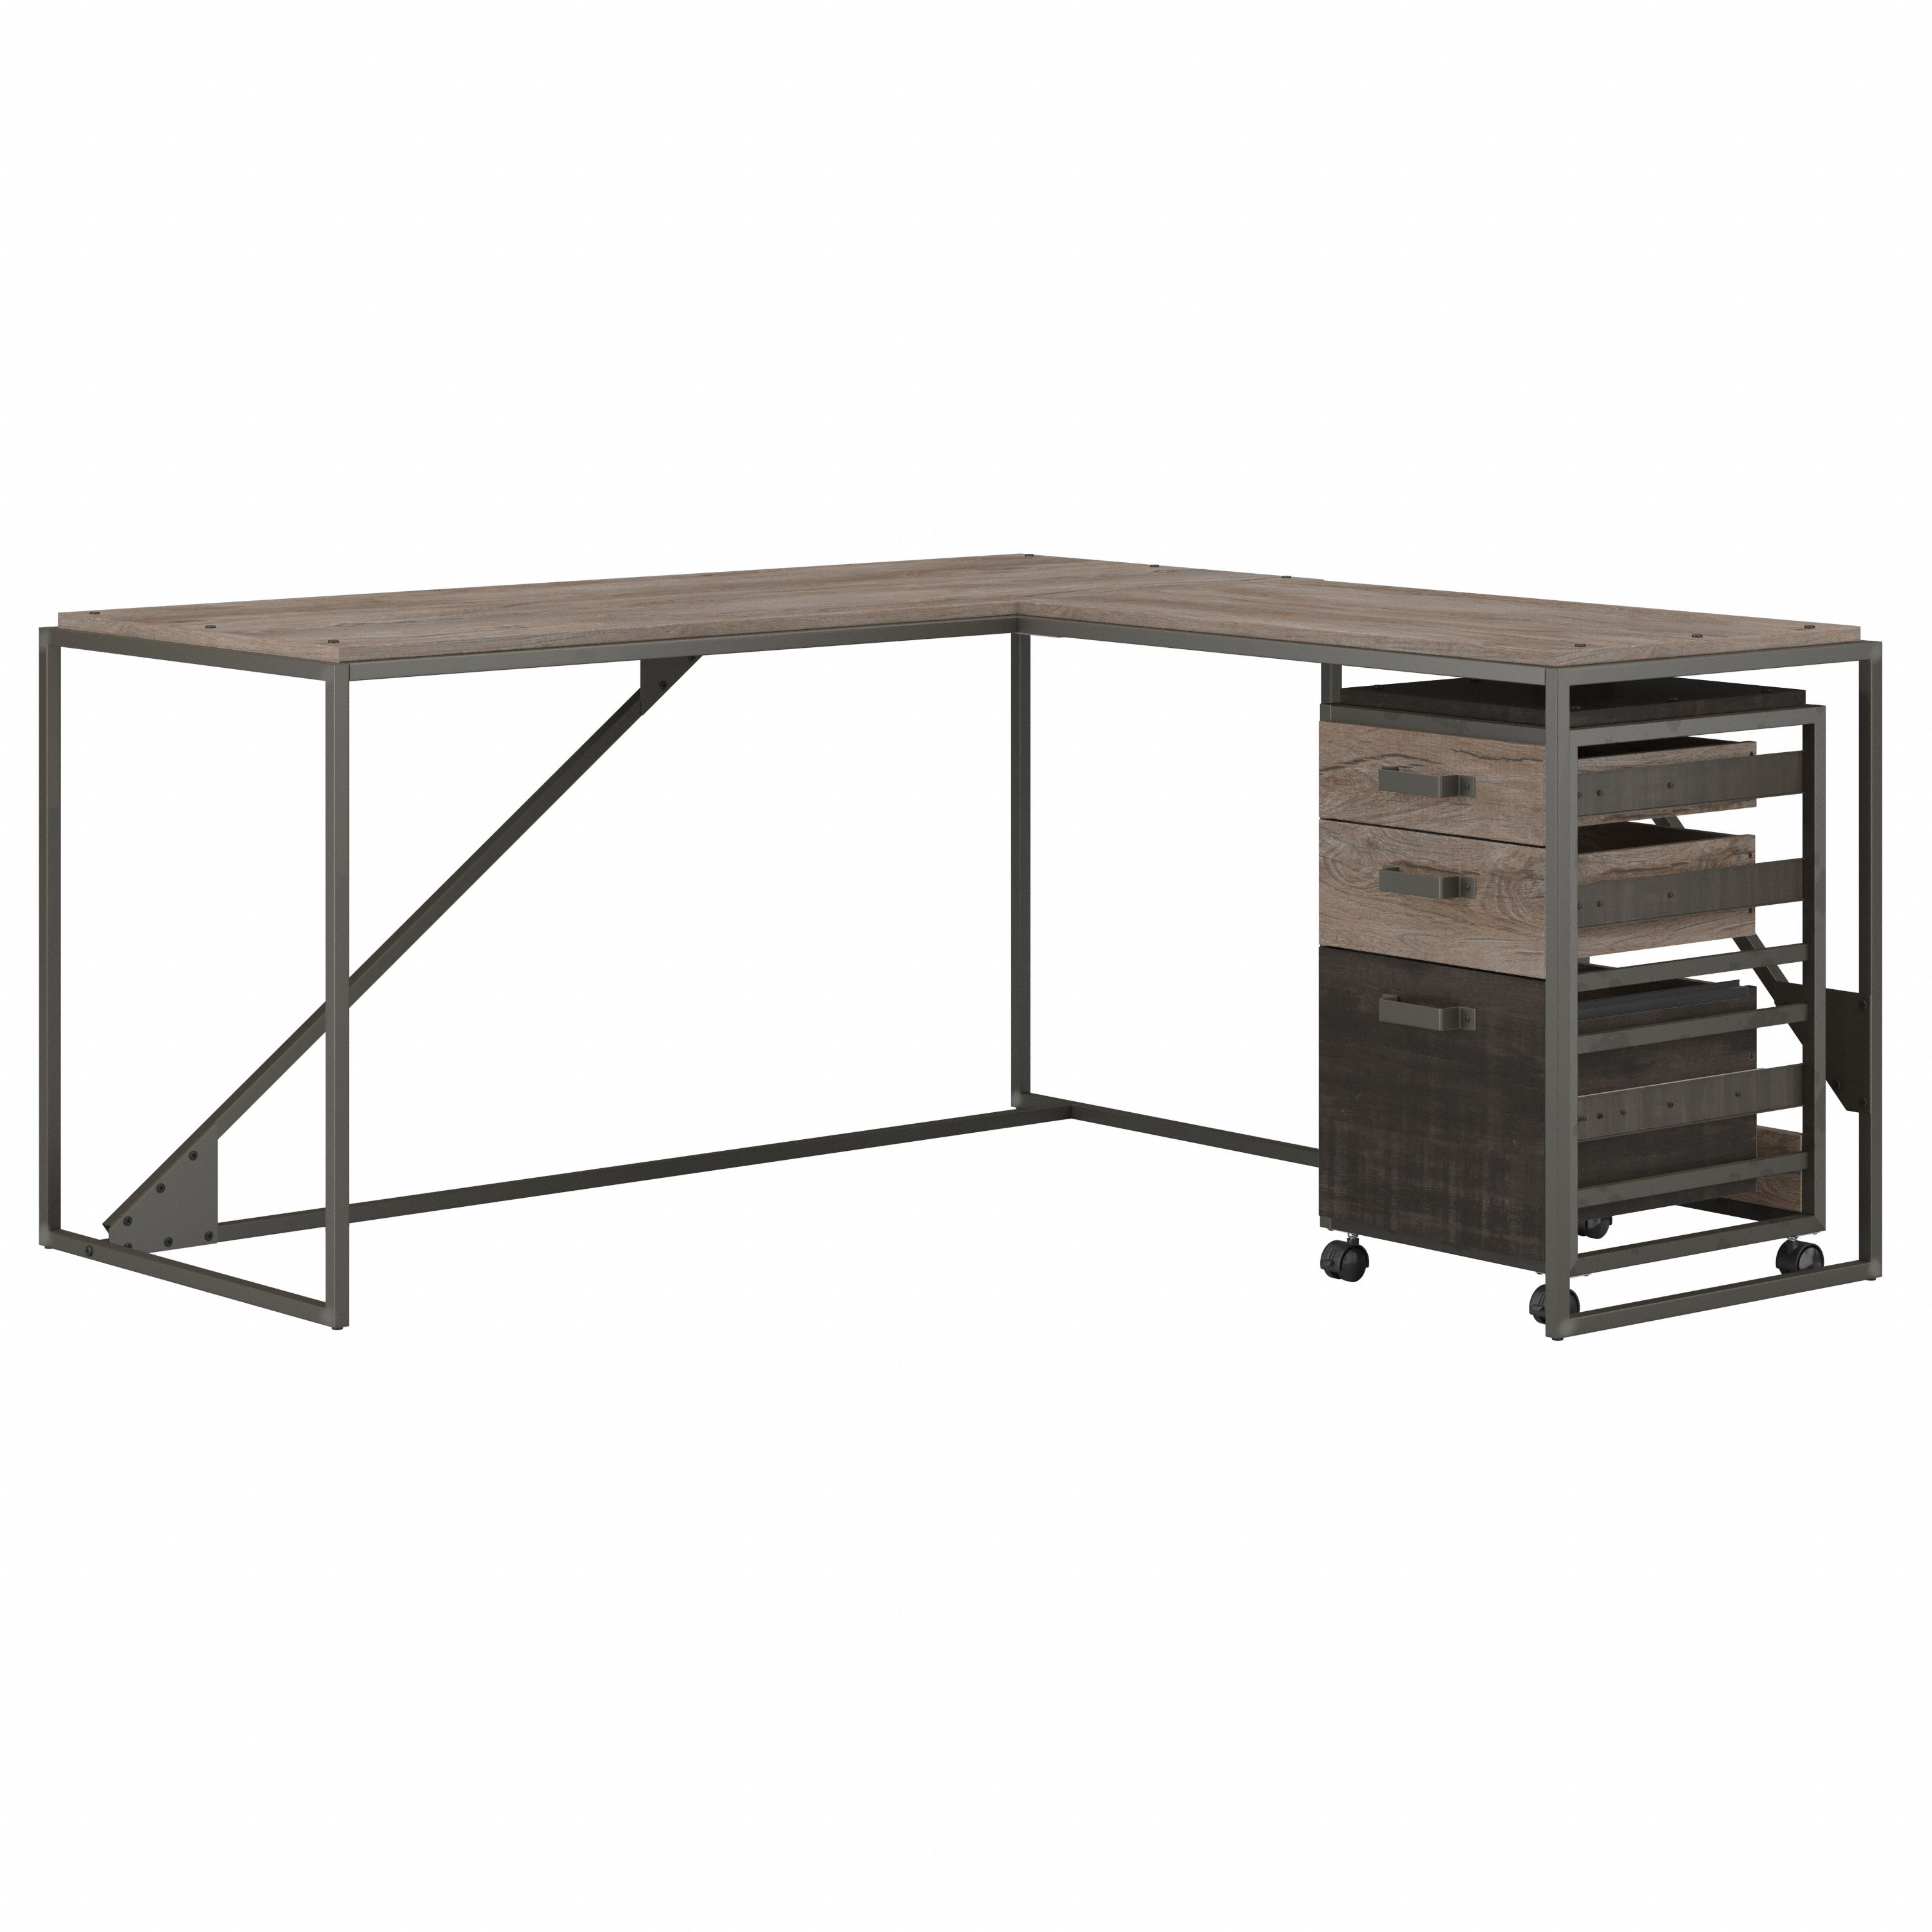 Shop Bush Furniture Refinery 62W L Shaped Industrial Desk with 3 Drawer Mobile File Cabinet 02 RFY018RG #color_rustic gray/charred wood